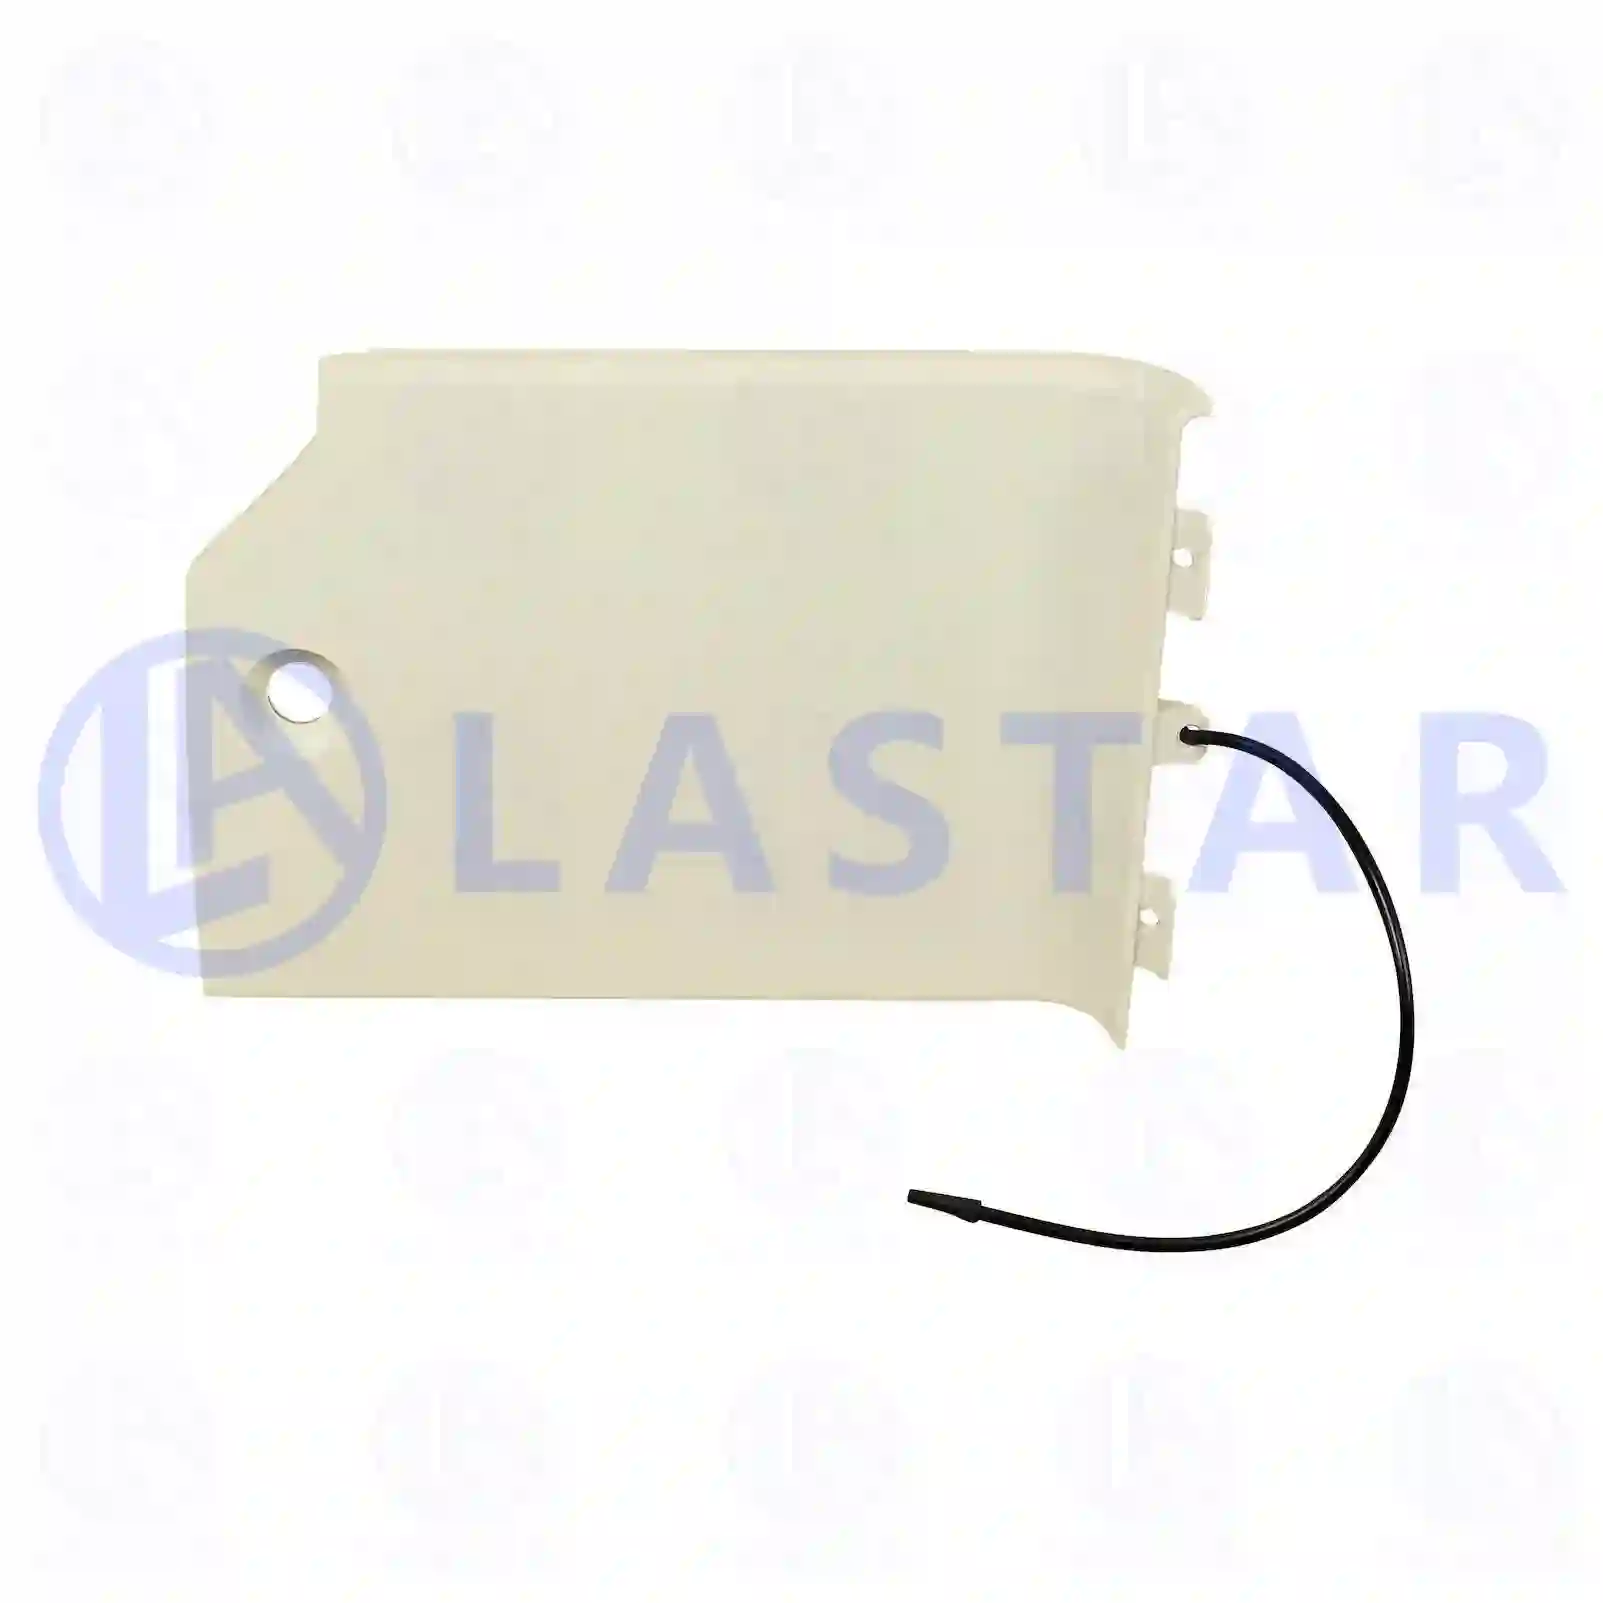 Cover plate, step well case, left, 77719778, 1837634, 1881346 ||  77719778 Lastar Spare Part | Truck Spare Parts, Auotomotive Spare Parts Cover plate, step well case, left, 77719778, 1837634, 1881346 ||  77719778 Lastar Spare Part | Truck Spare Parts, Auotomotive Spare Parts